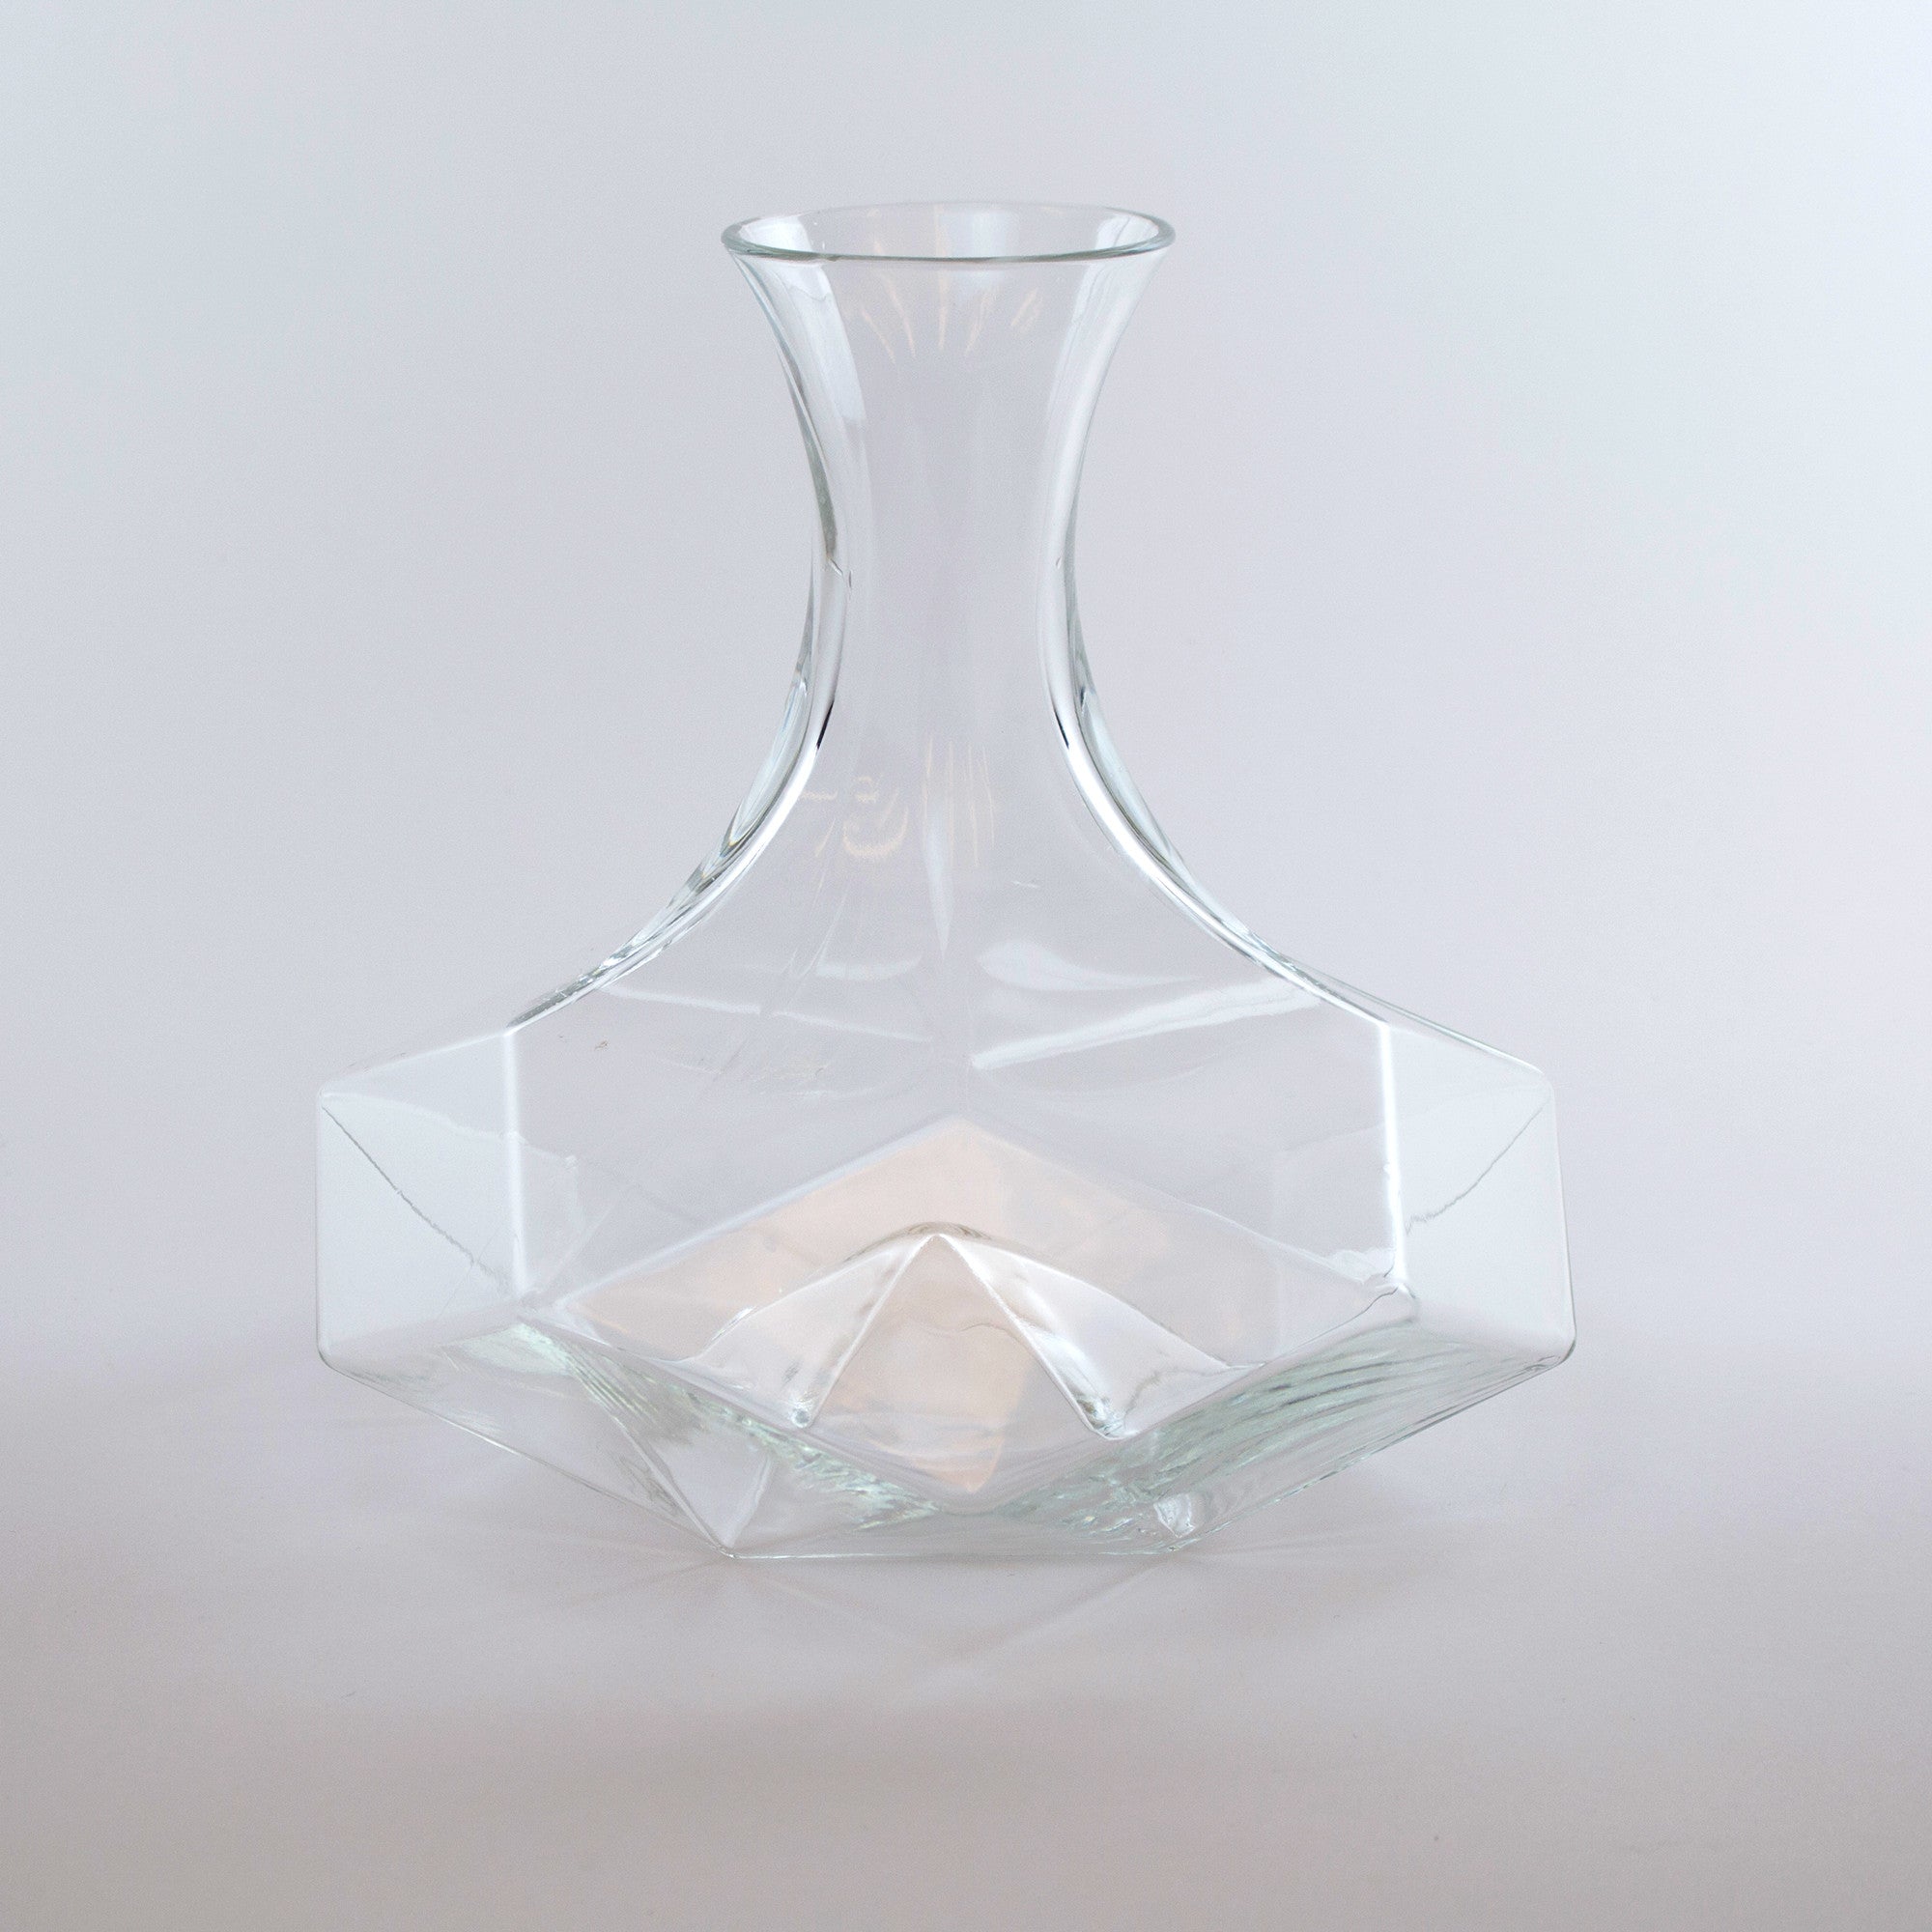 The Geometric Crystal Decanter is our best-selling decanter for wine